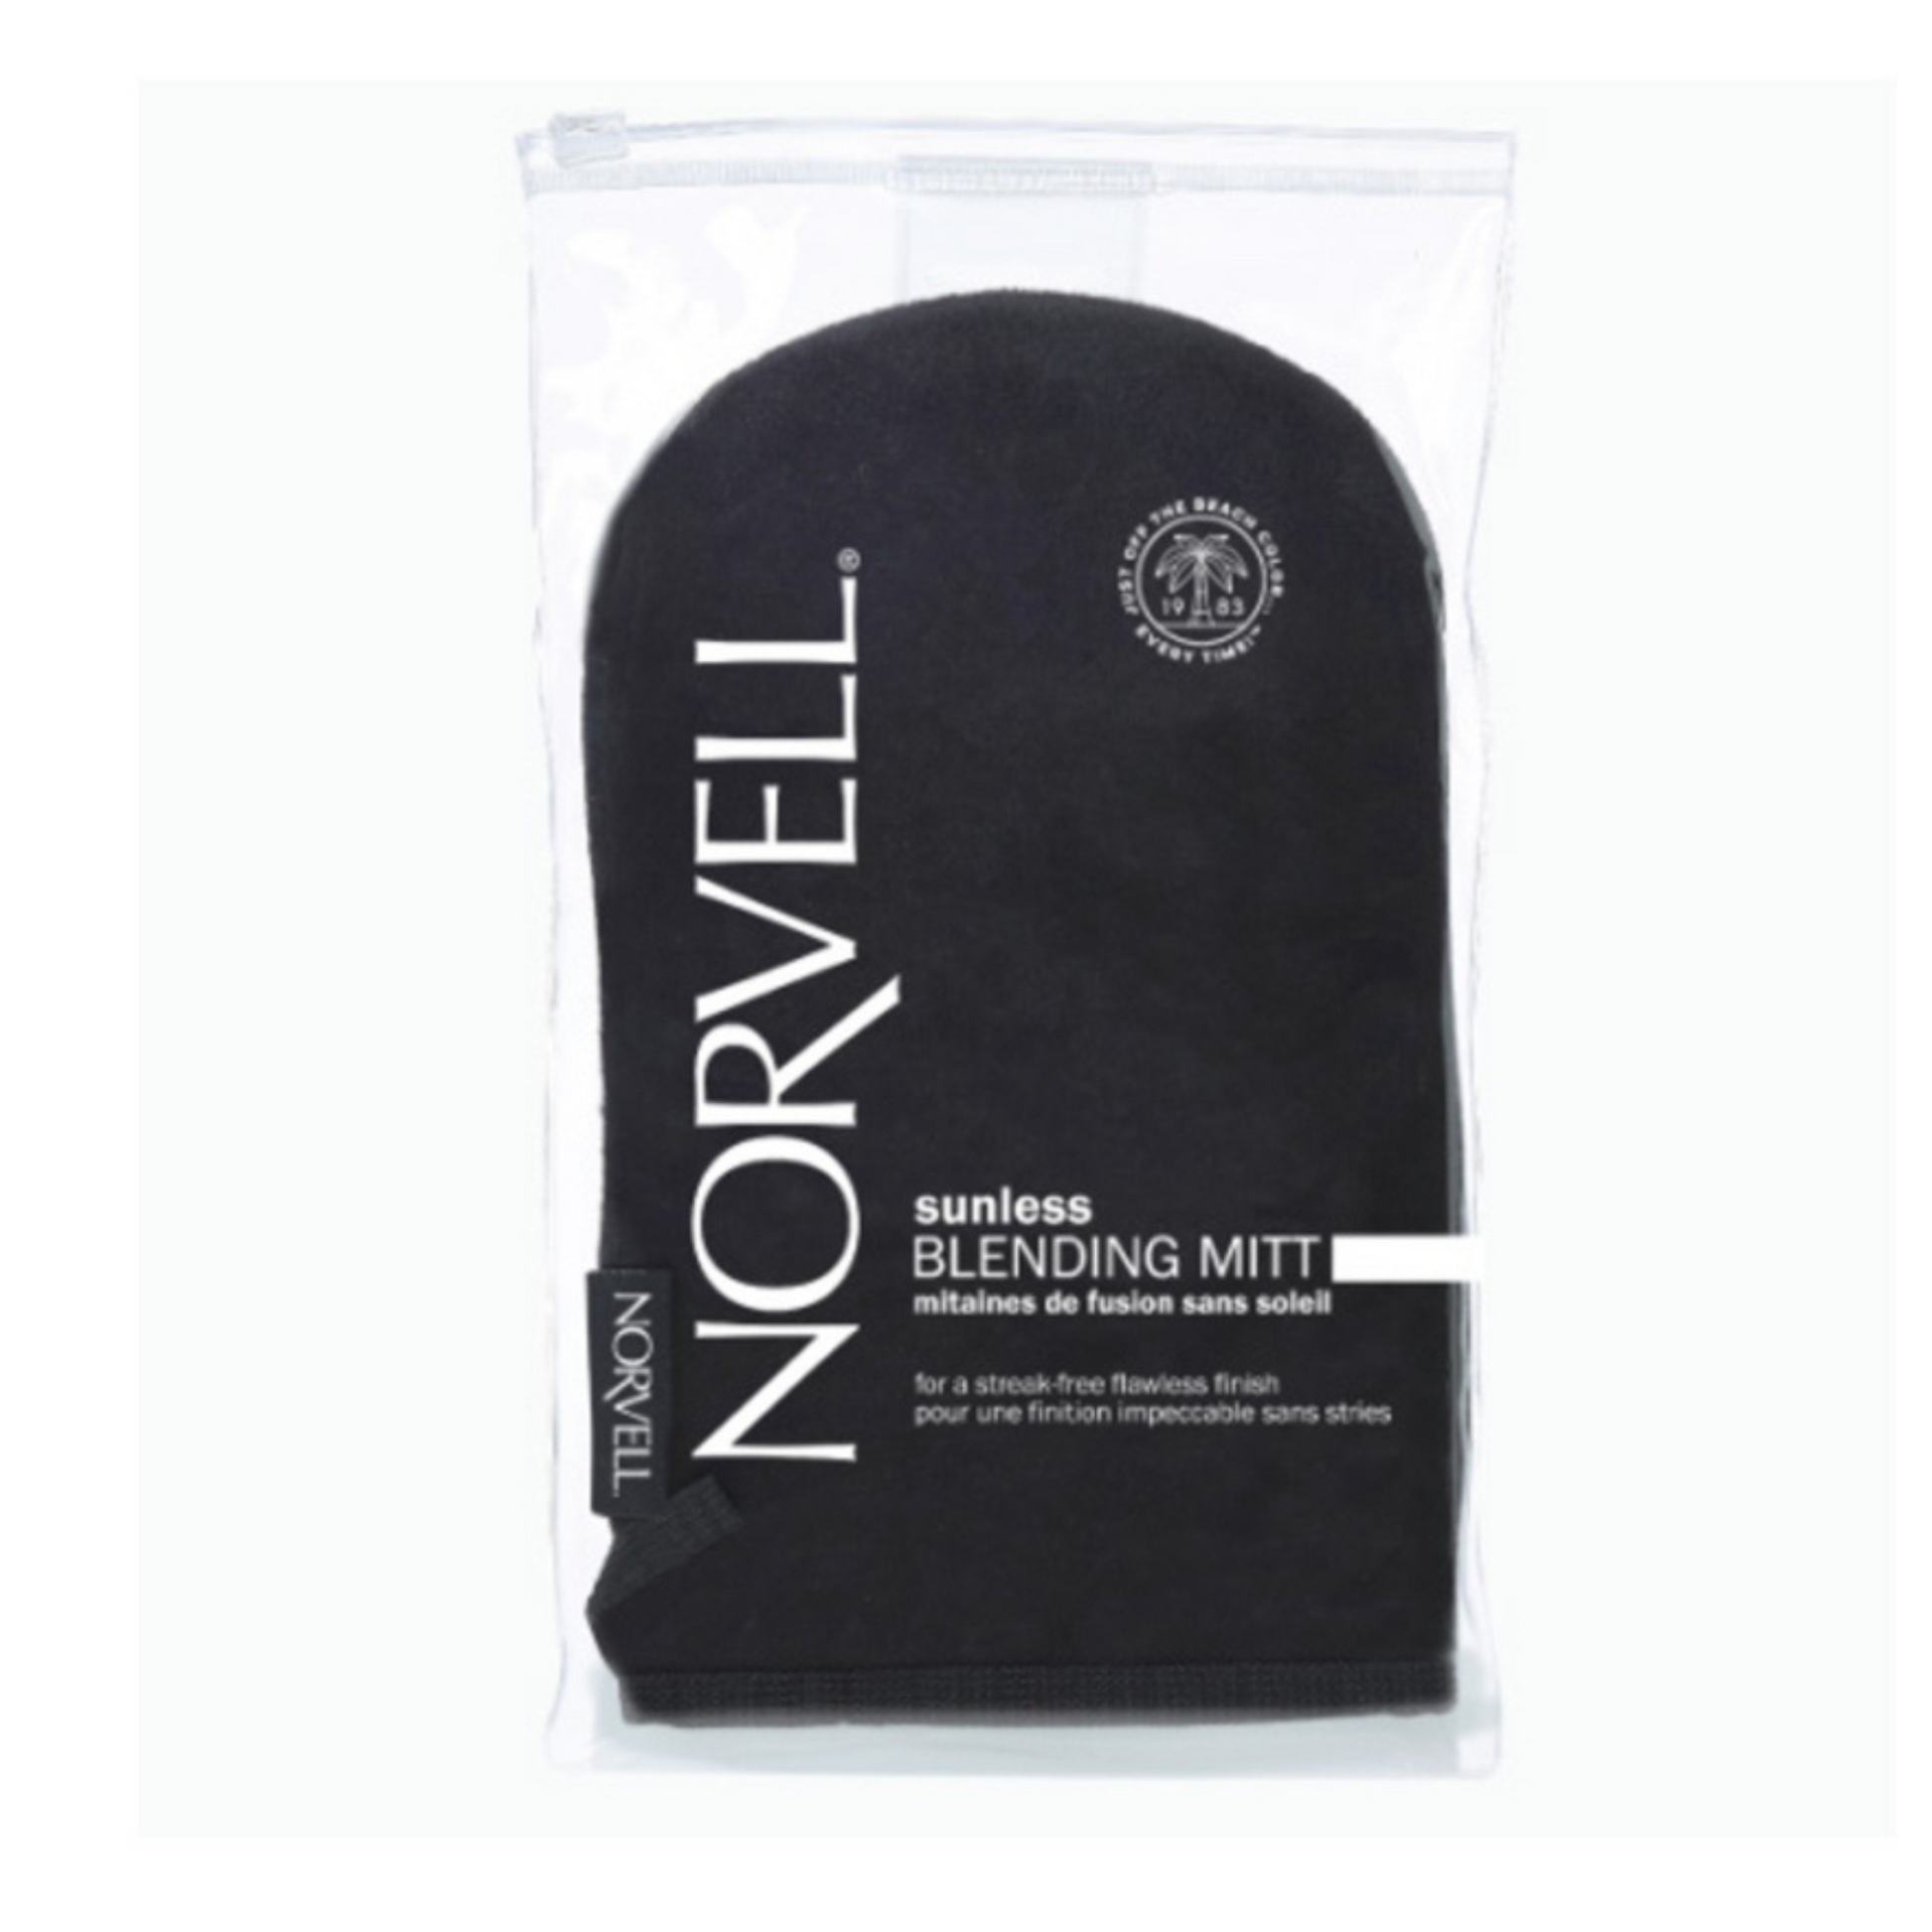 The Blending Mitt provides a mess-free sunless tanning experience. Its unique design allows for even coverage and an ultra-smooth finish. This mitt eliminates streaks and lines for a flawless bronzed look.